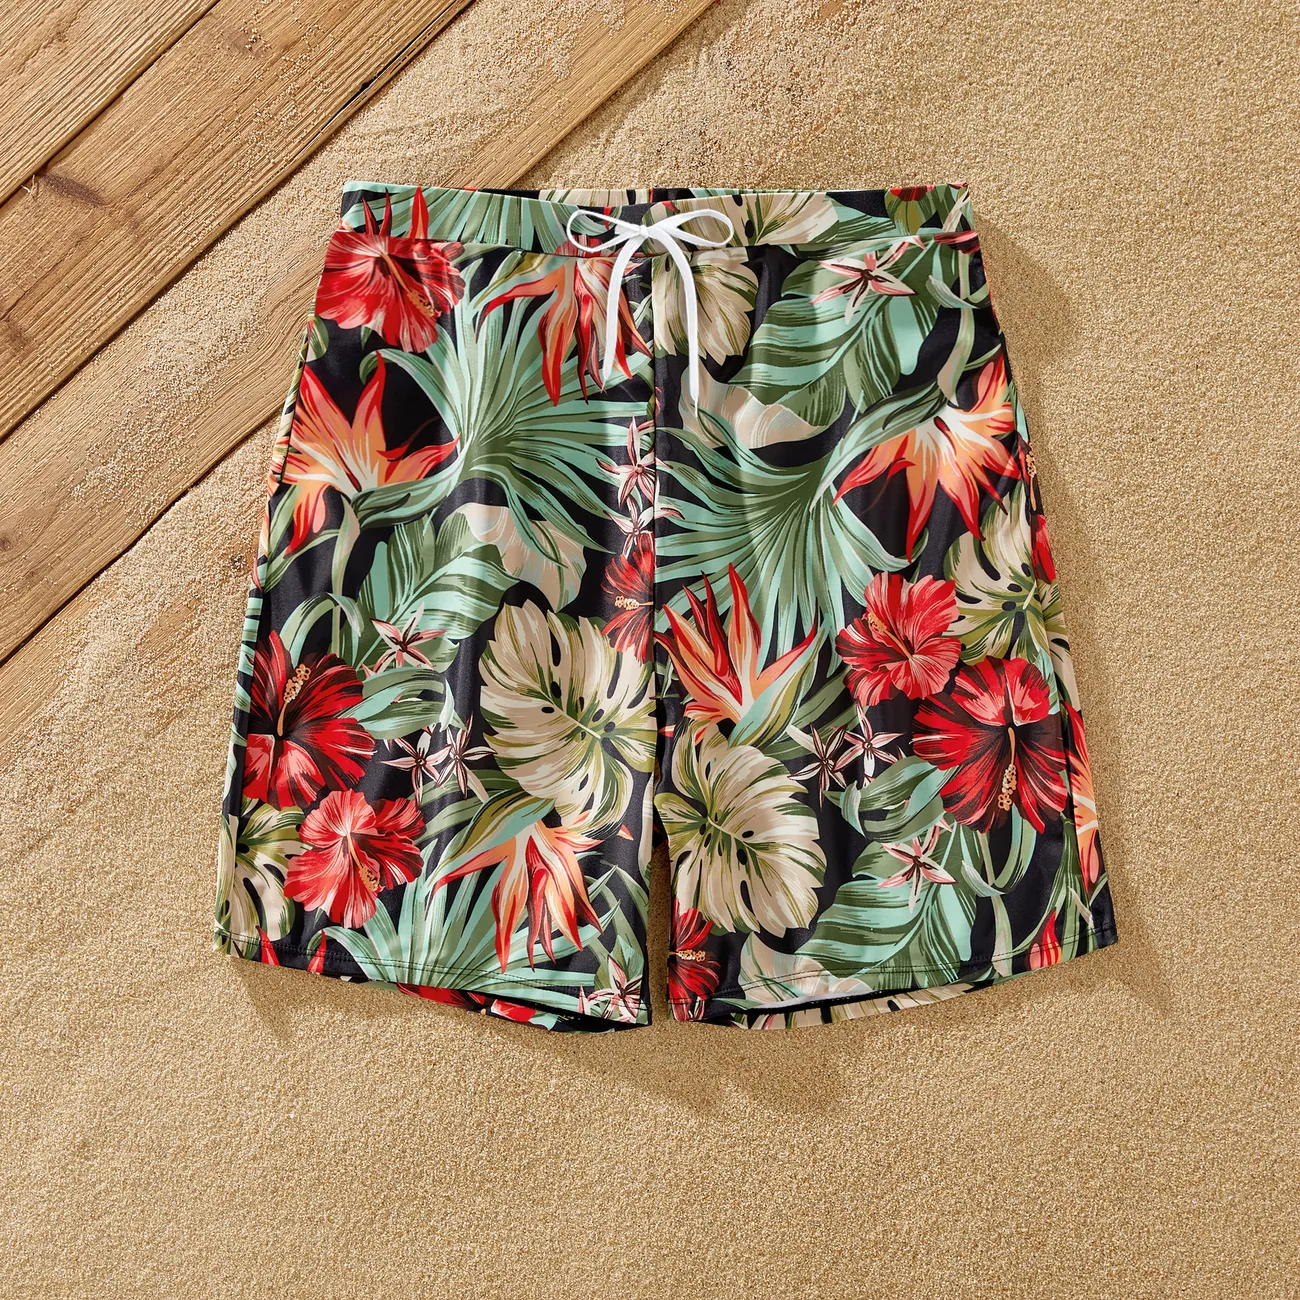 Family Matching Allover Floral Print Swim Trunks Shorts and Ruffle Belted One-Piece Swimsuit Pink big image 1